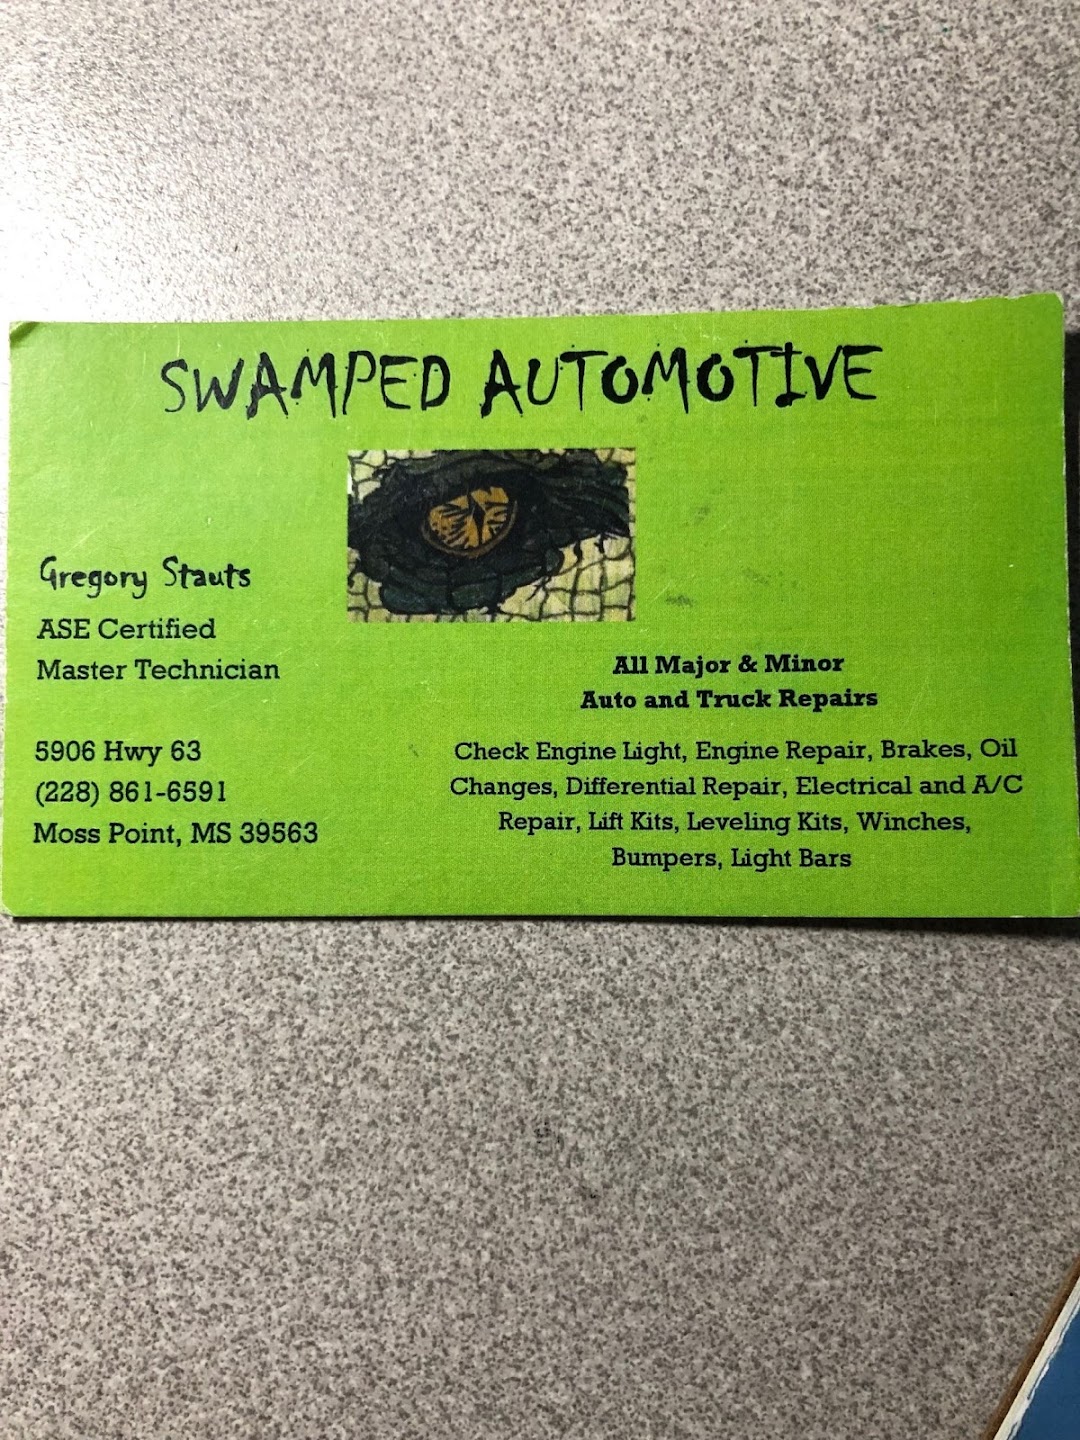 Swamped Automotive and Lifts